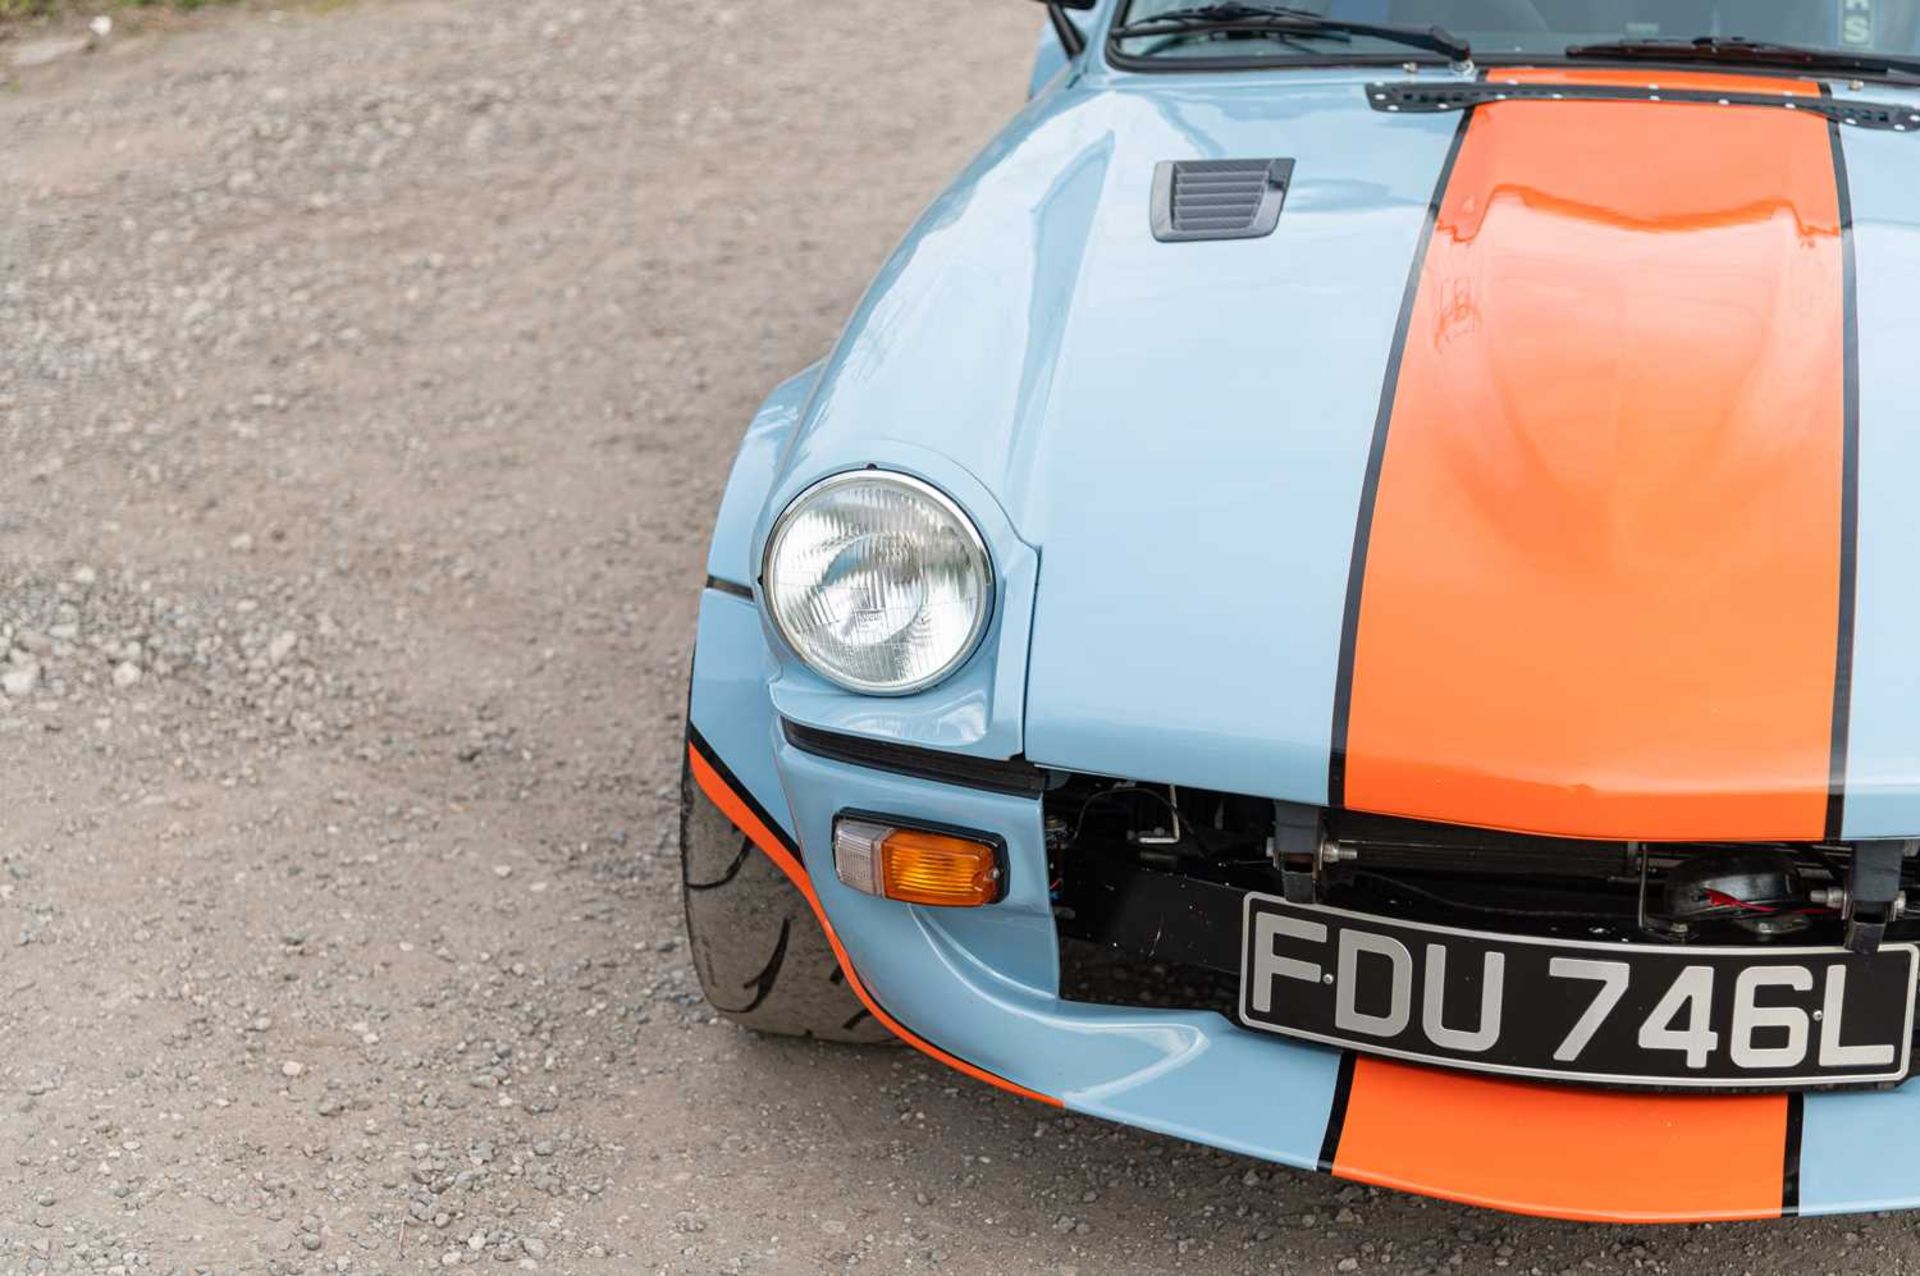 1973 Triumph GT6  ***NO RESERVE*** Presented in Gulf Racing-inspired paintwork, road-going track wea - Image 30 of 65